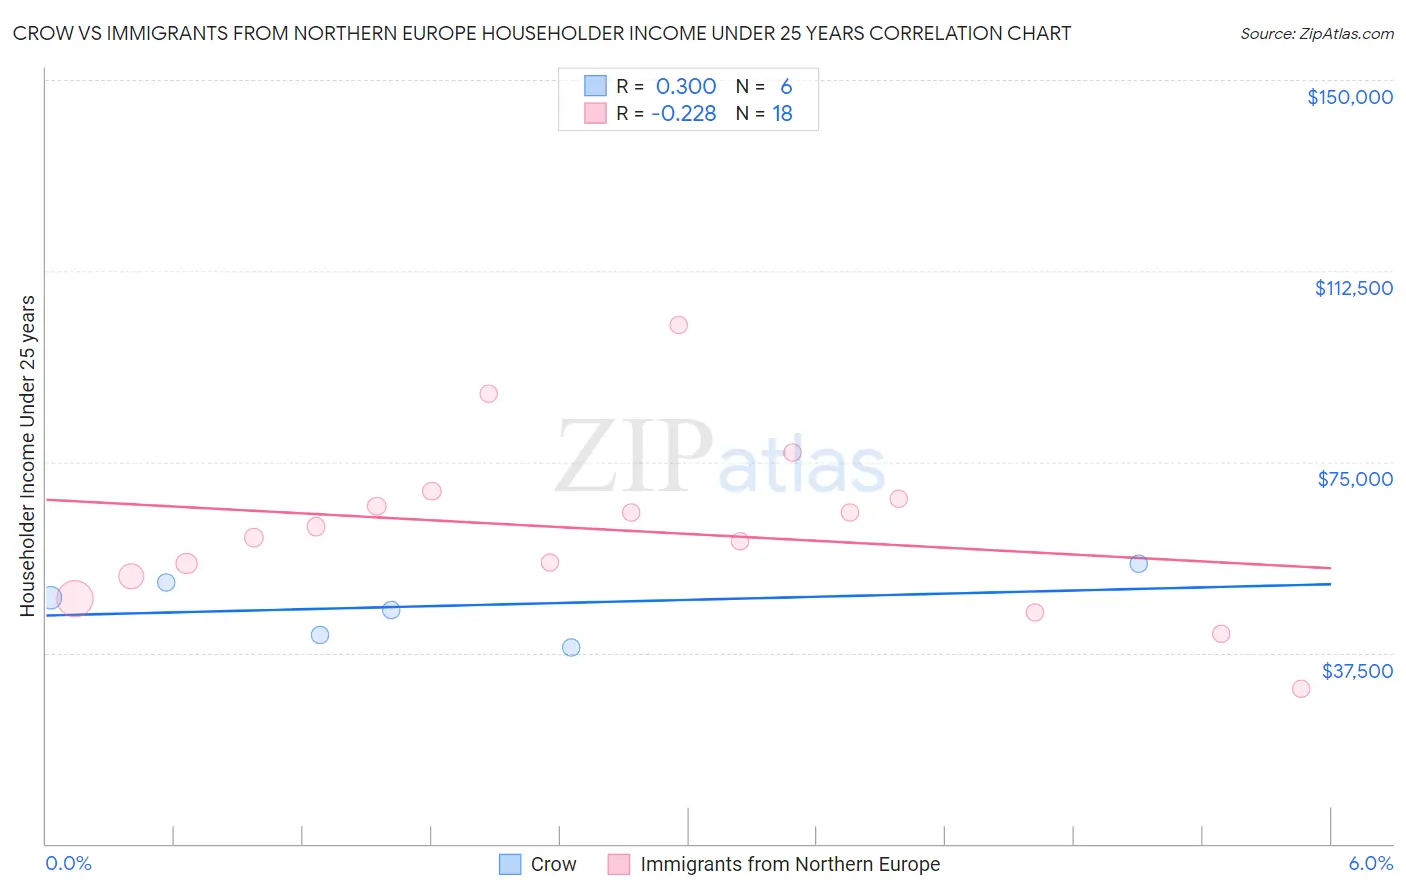 Crow vs Immigrants from Northern Europe Householder Income Under 25 years